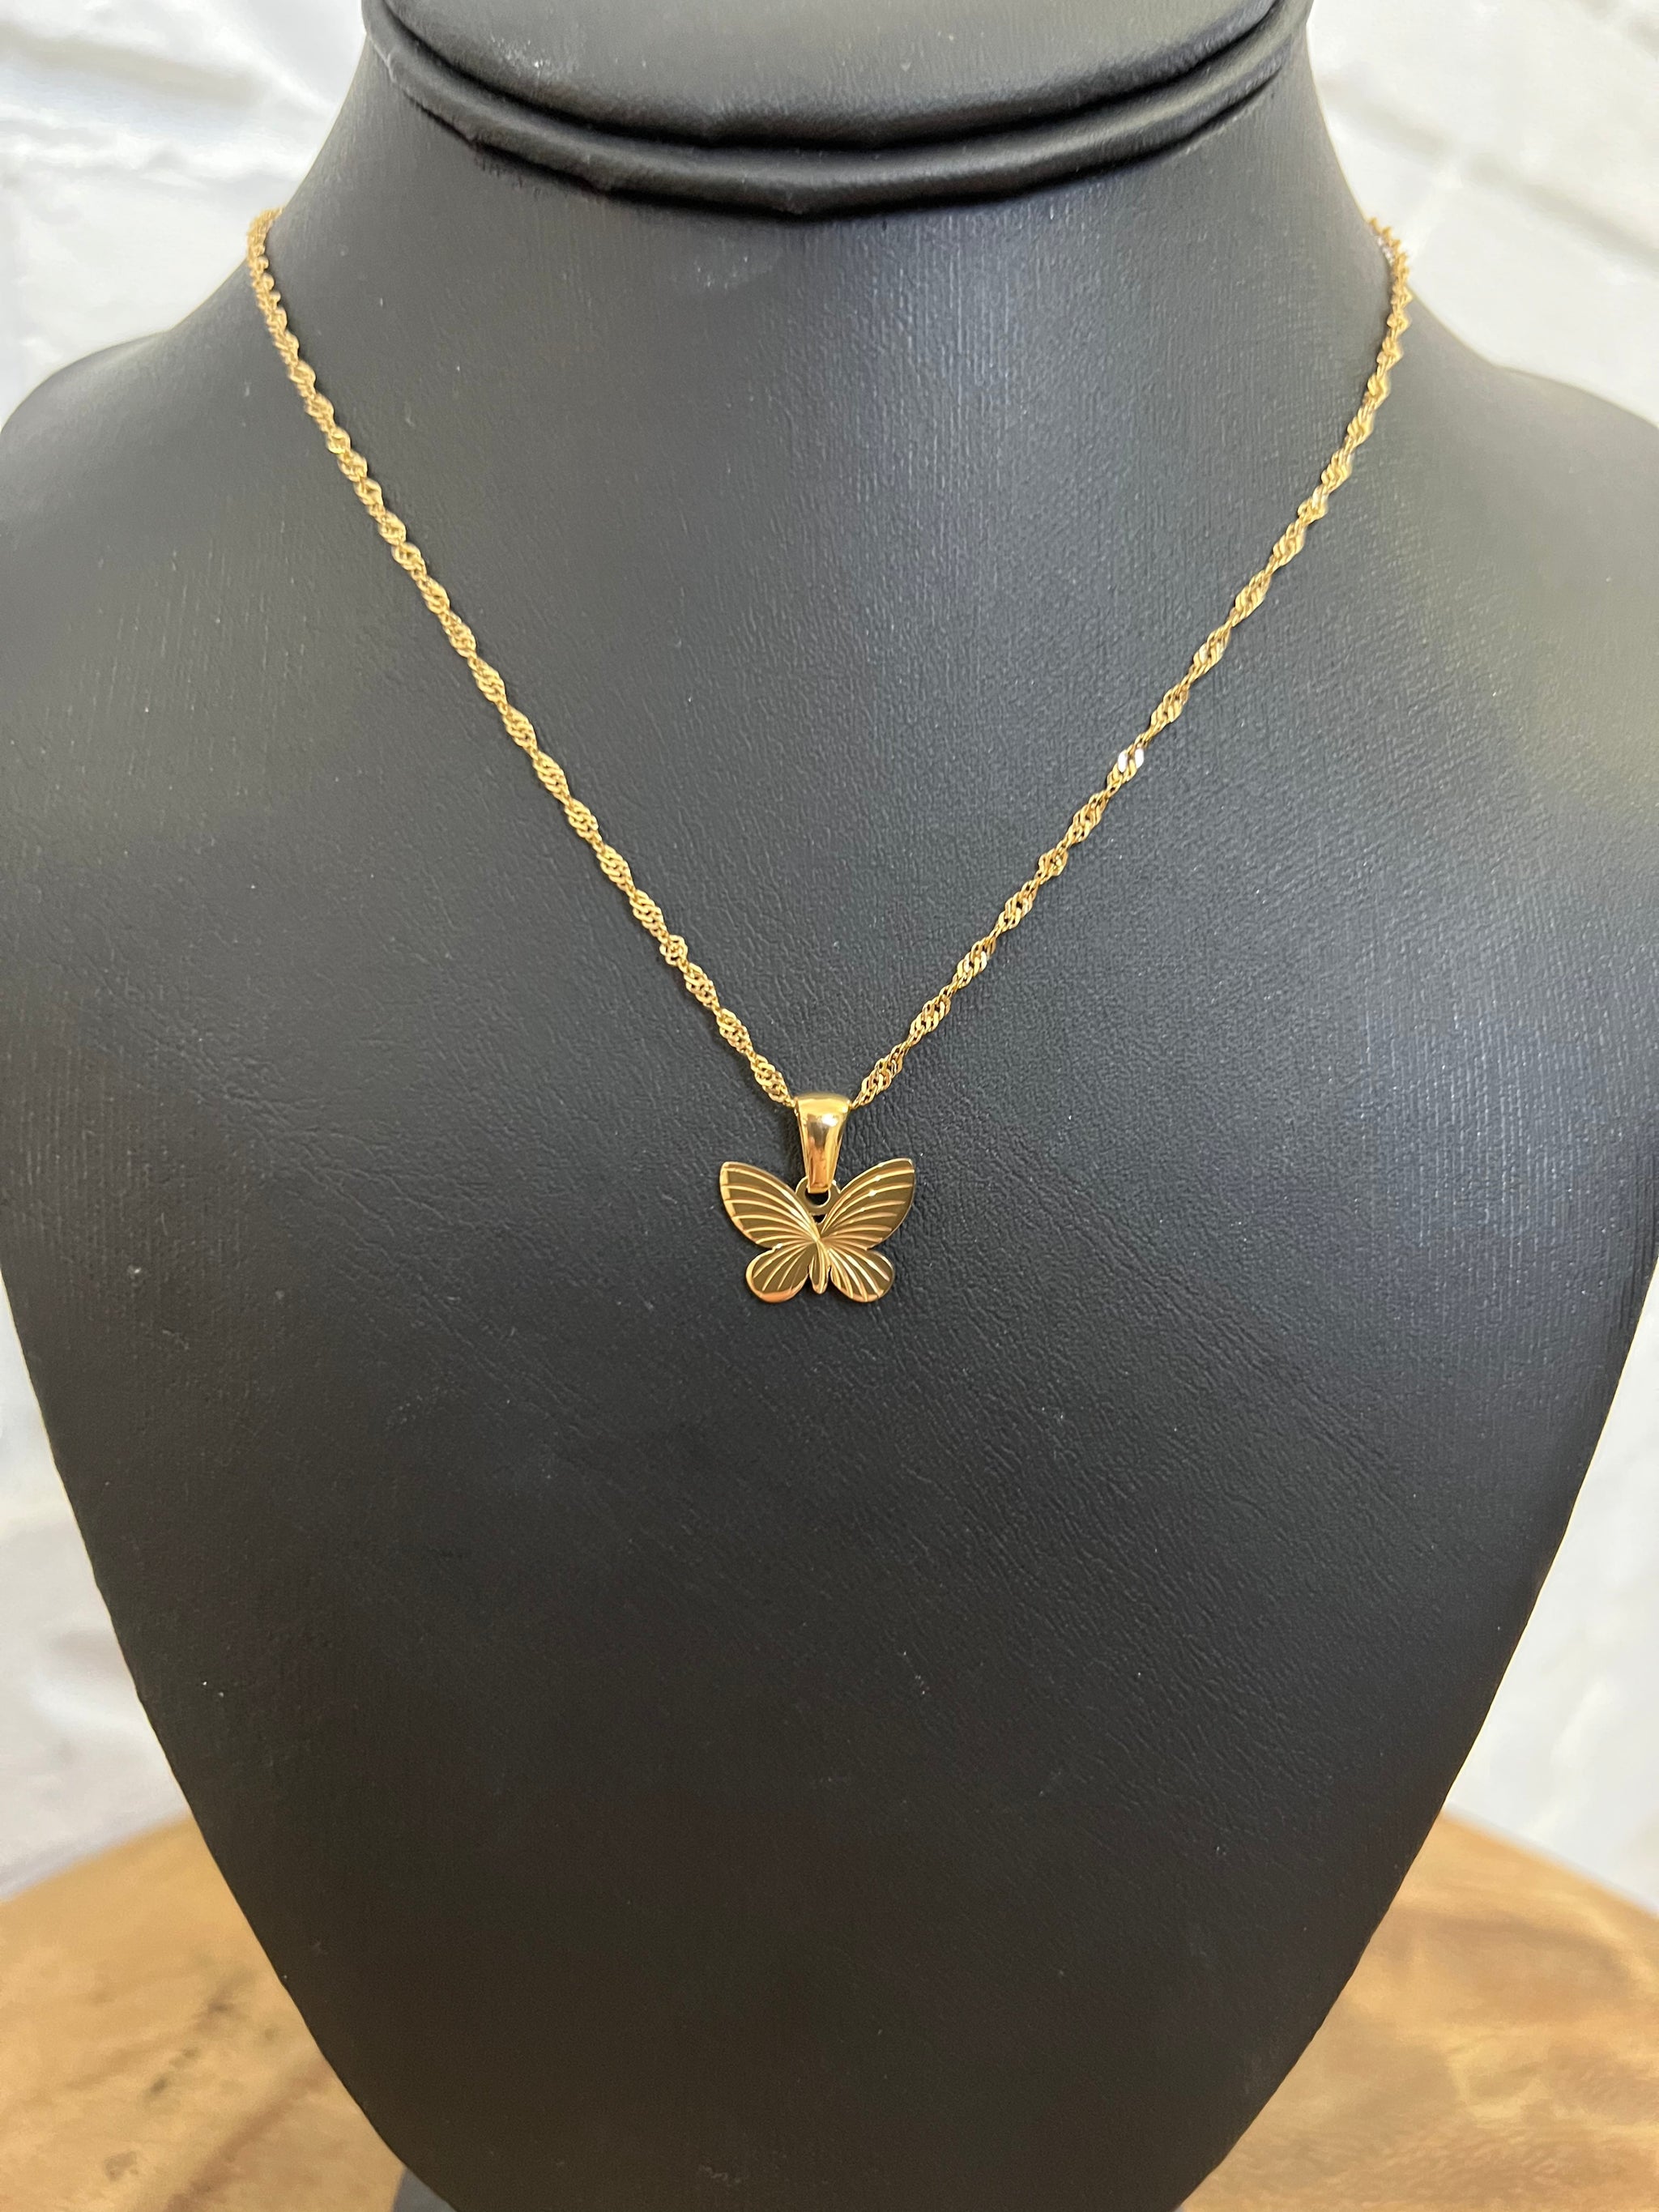 Flying Butterfly Necklace in Solid Gold - Talu RocknGold